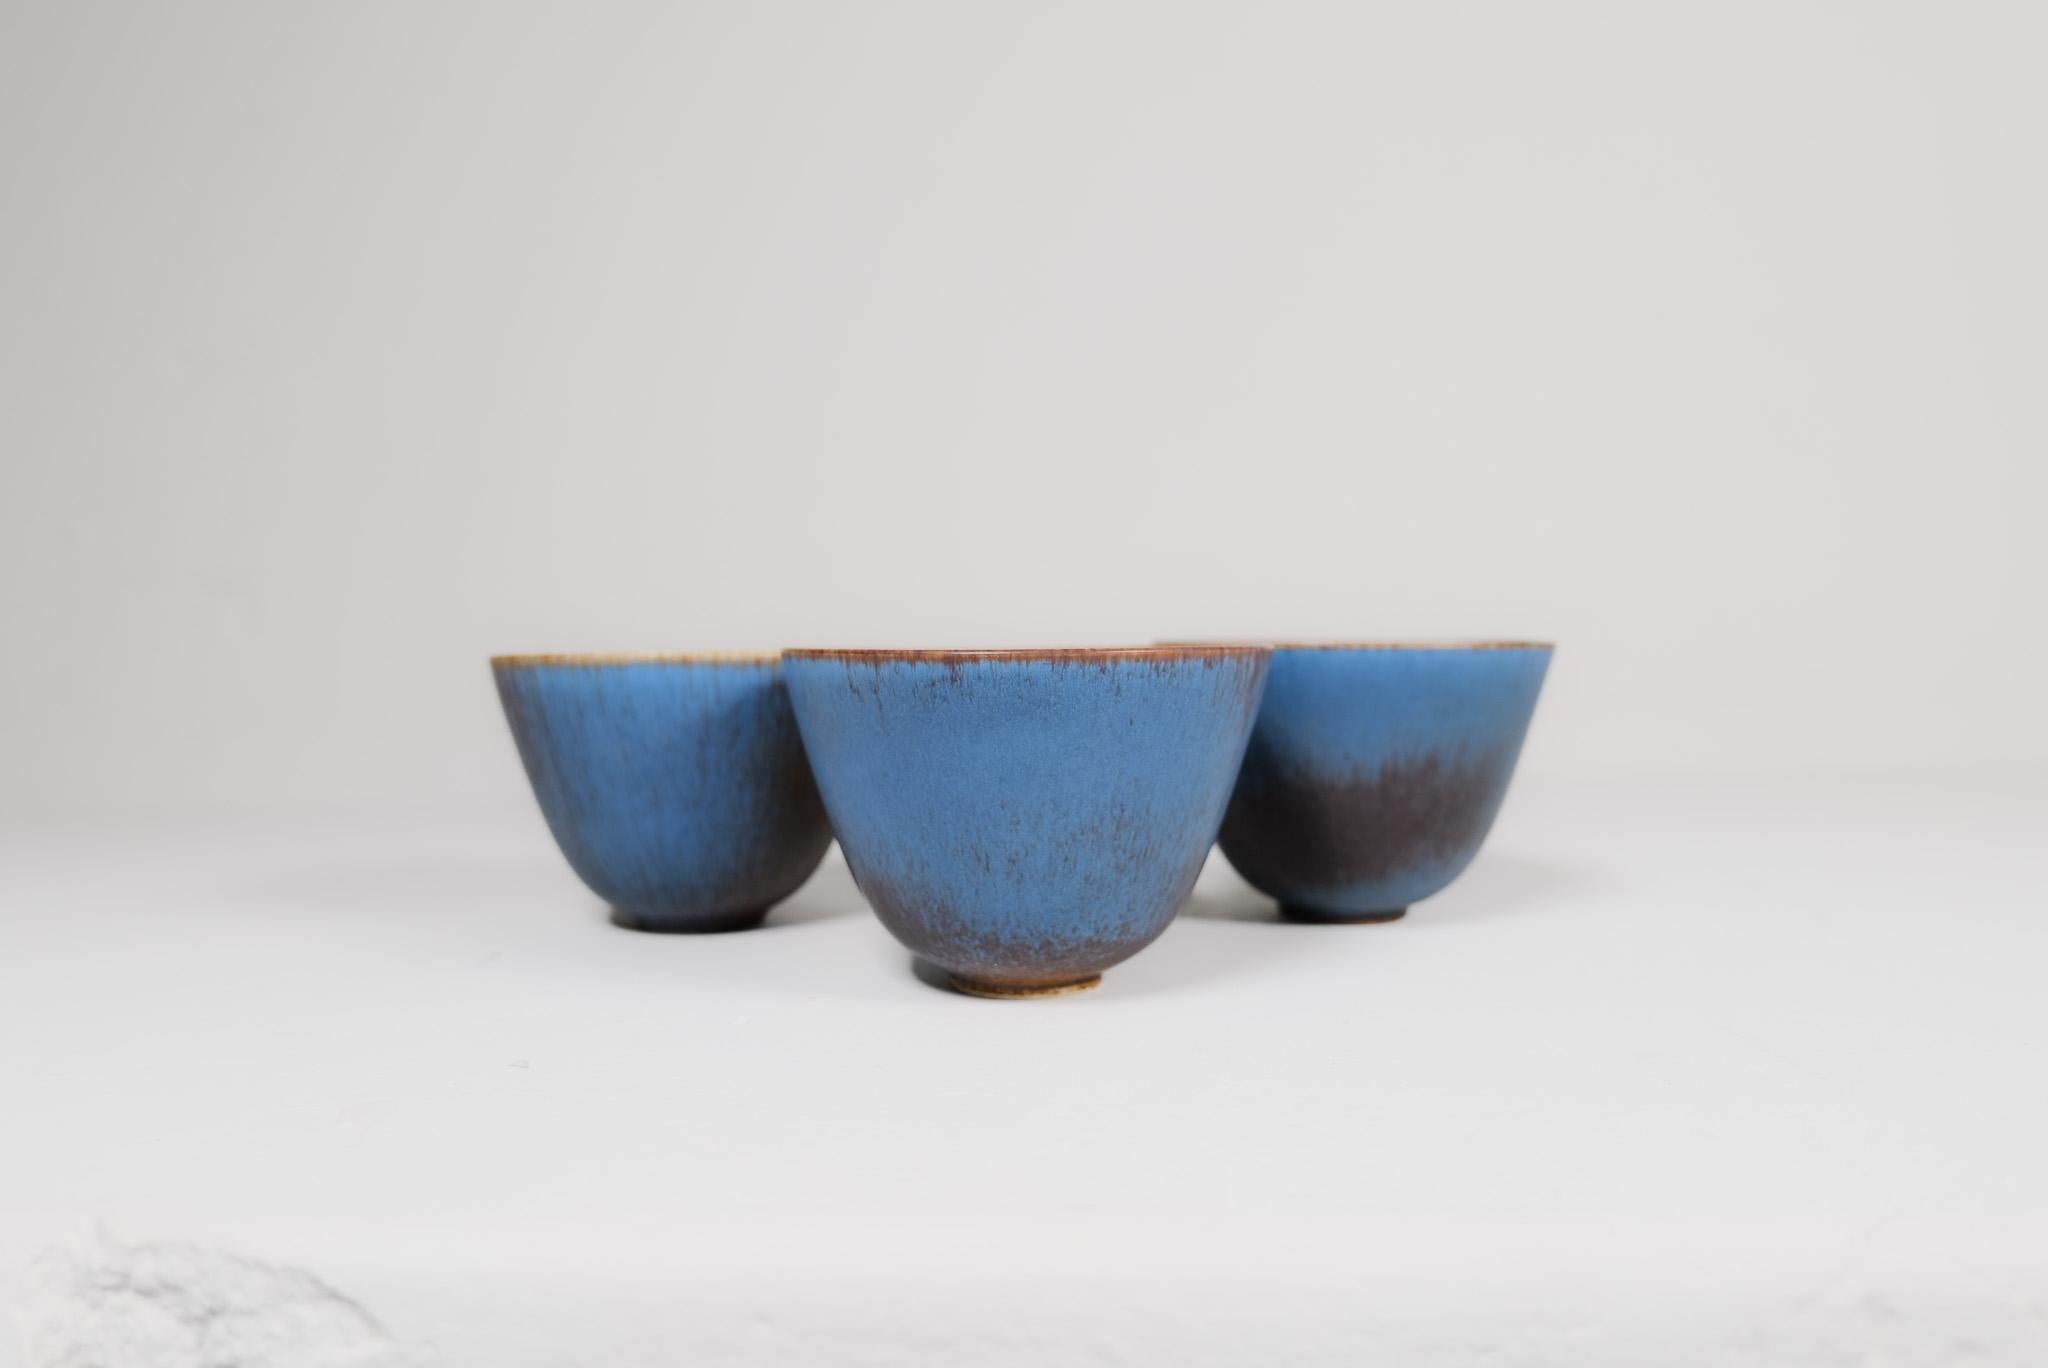 Three wonderful bowls from Rörstrand and designed by Gunnar Nylund. Made in Sweden in the midcentury. Beautiful, glazed bowls in good condition. The structure and form of the bowls works perfectly with the glaze. 

Good Vintage